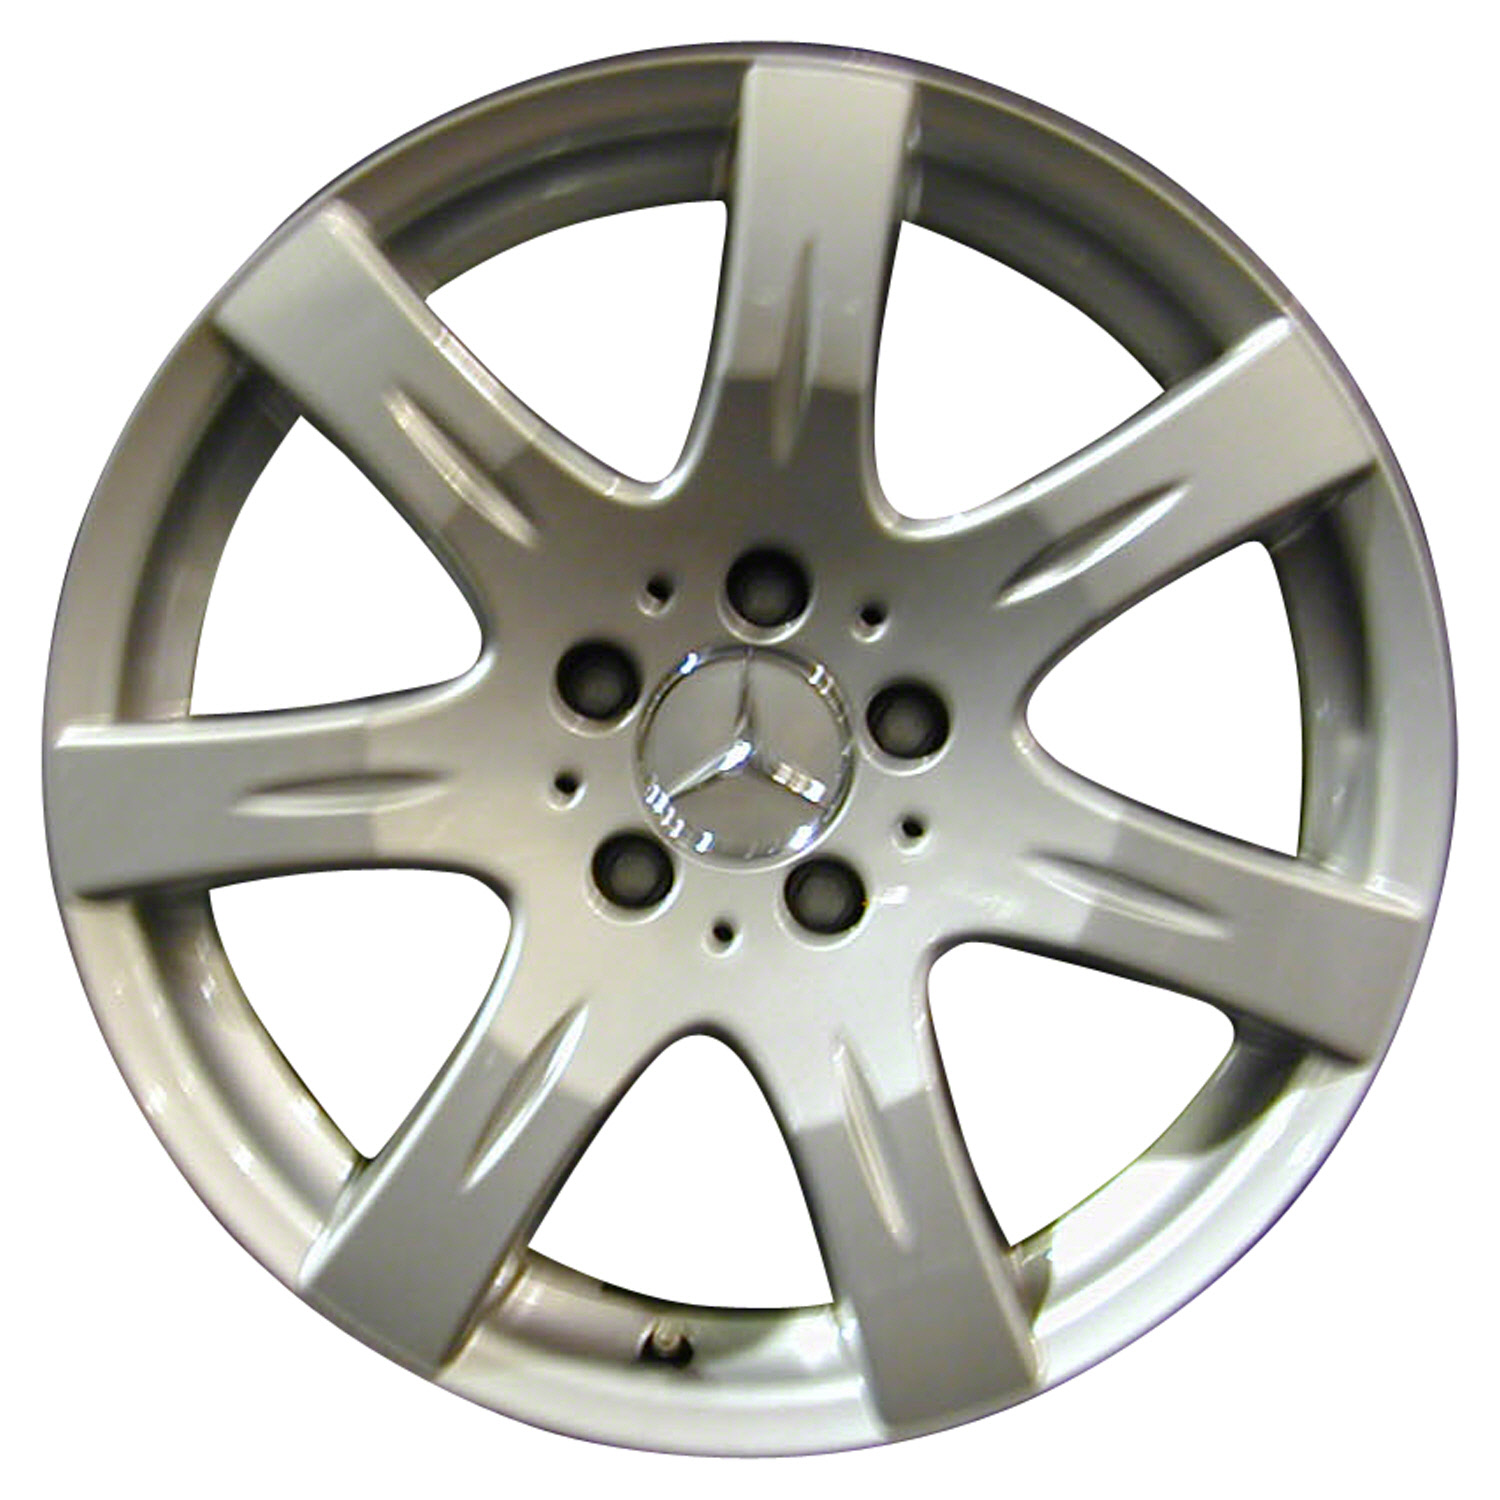 OEM Reman 17x8.5 Alloy Wheel Rim Bright Silver Full Face Painted 65511